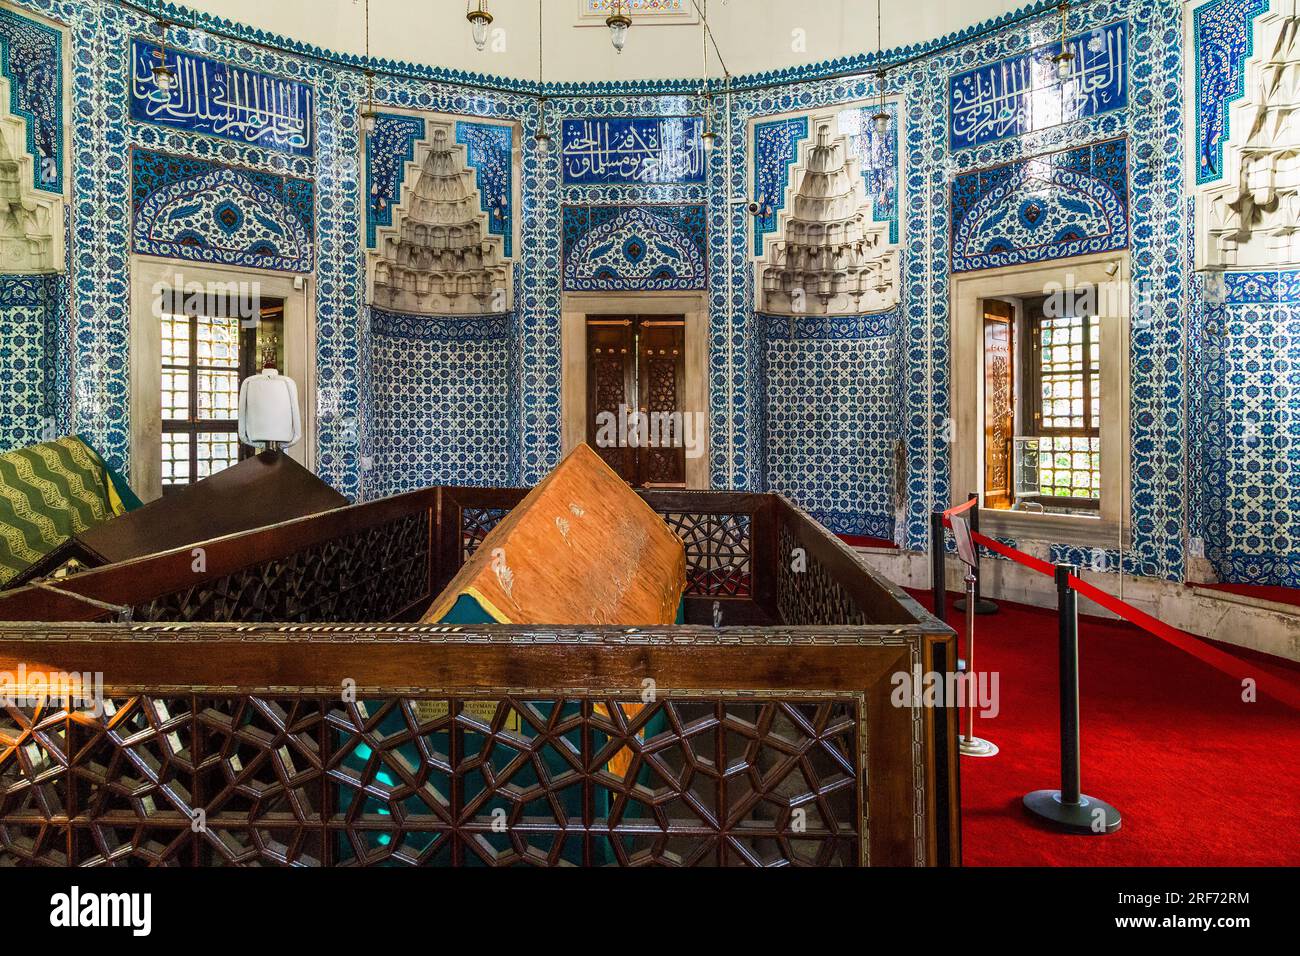 ISTANBUL, TURKEY - SEPTEMBER 14, 2017: This is the burial of the wife of Sultan Suleiman the Magnificent in the mausoleum of Hurrem Sultan (Roksolana) Stock Photo